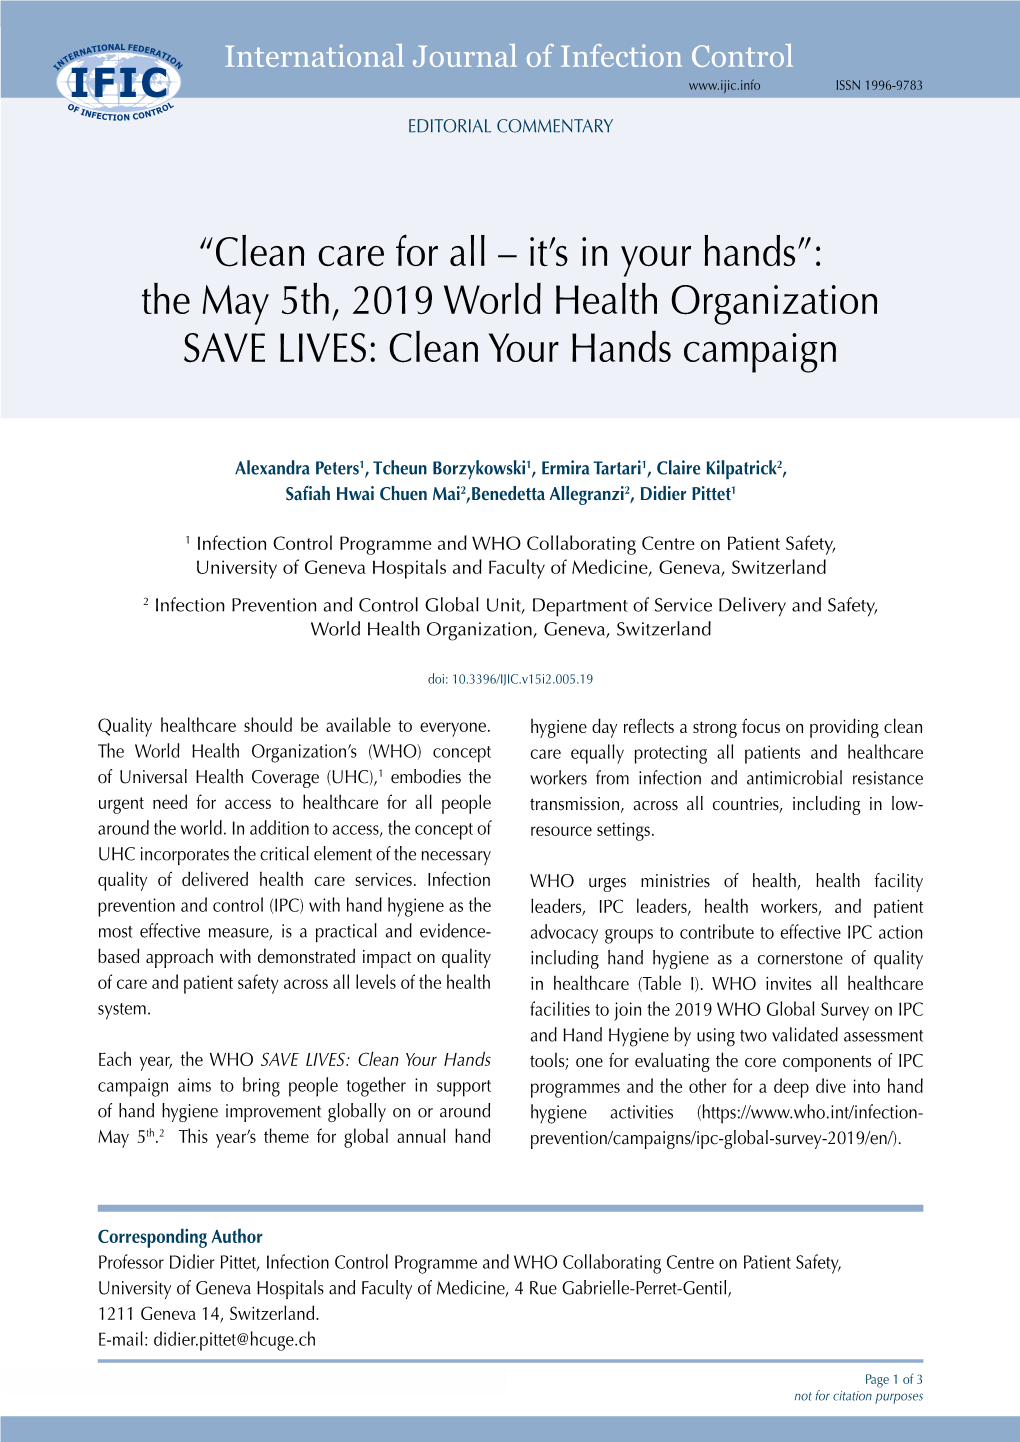 “Clean Care for All – It's in Your Hands”: the May 5Th, 2019 World